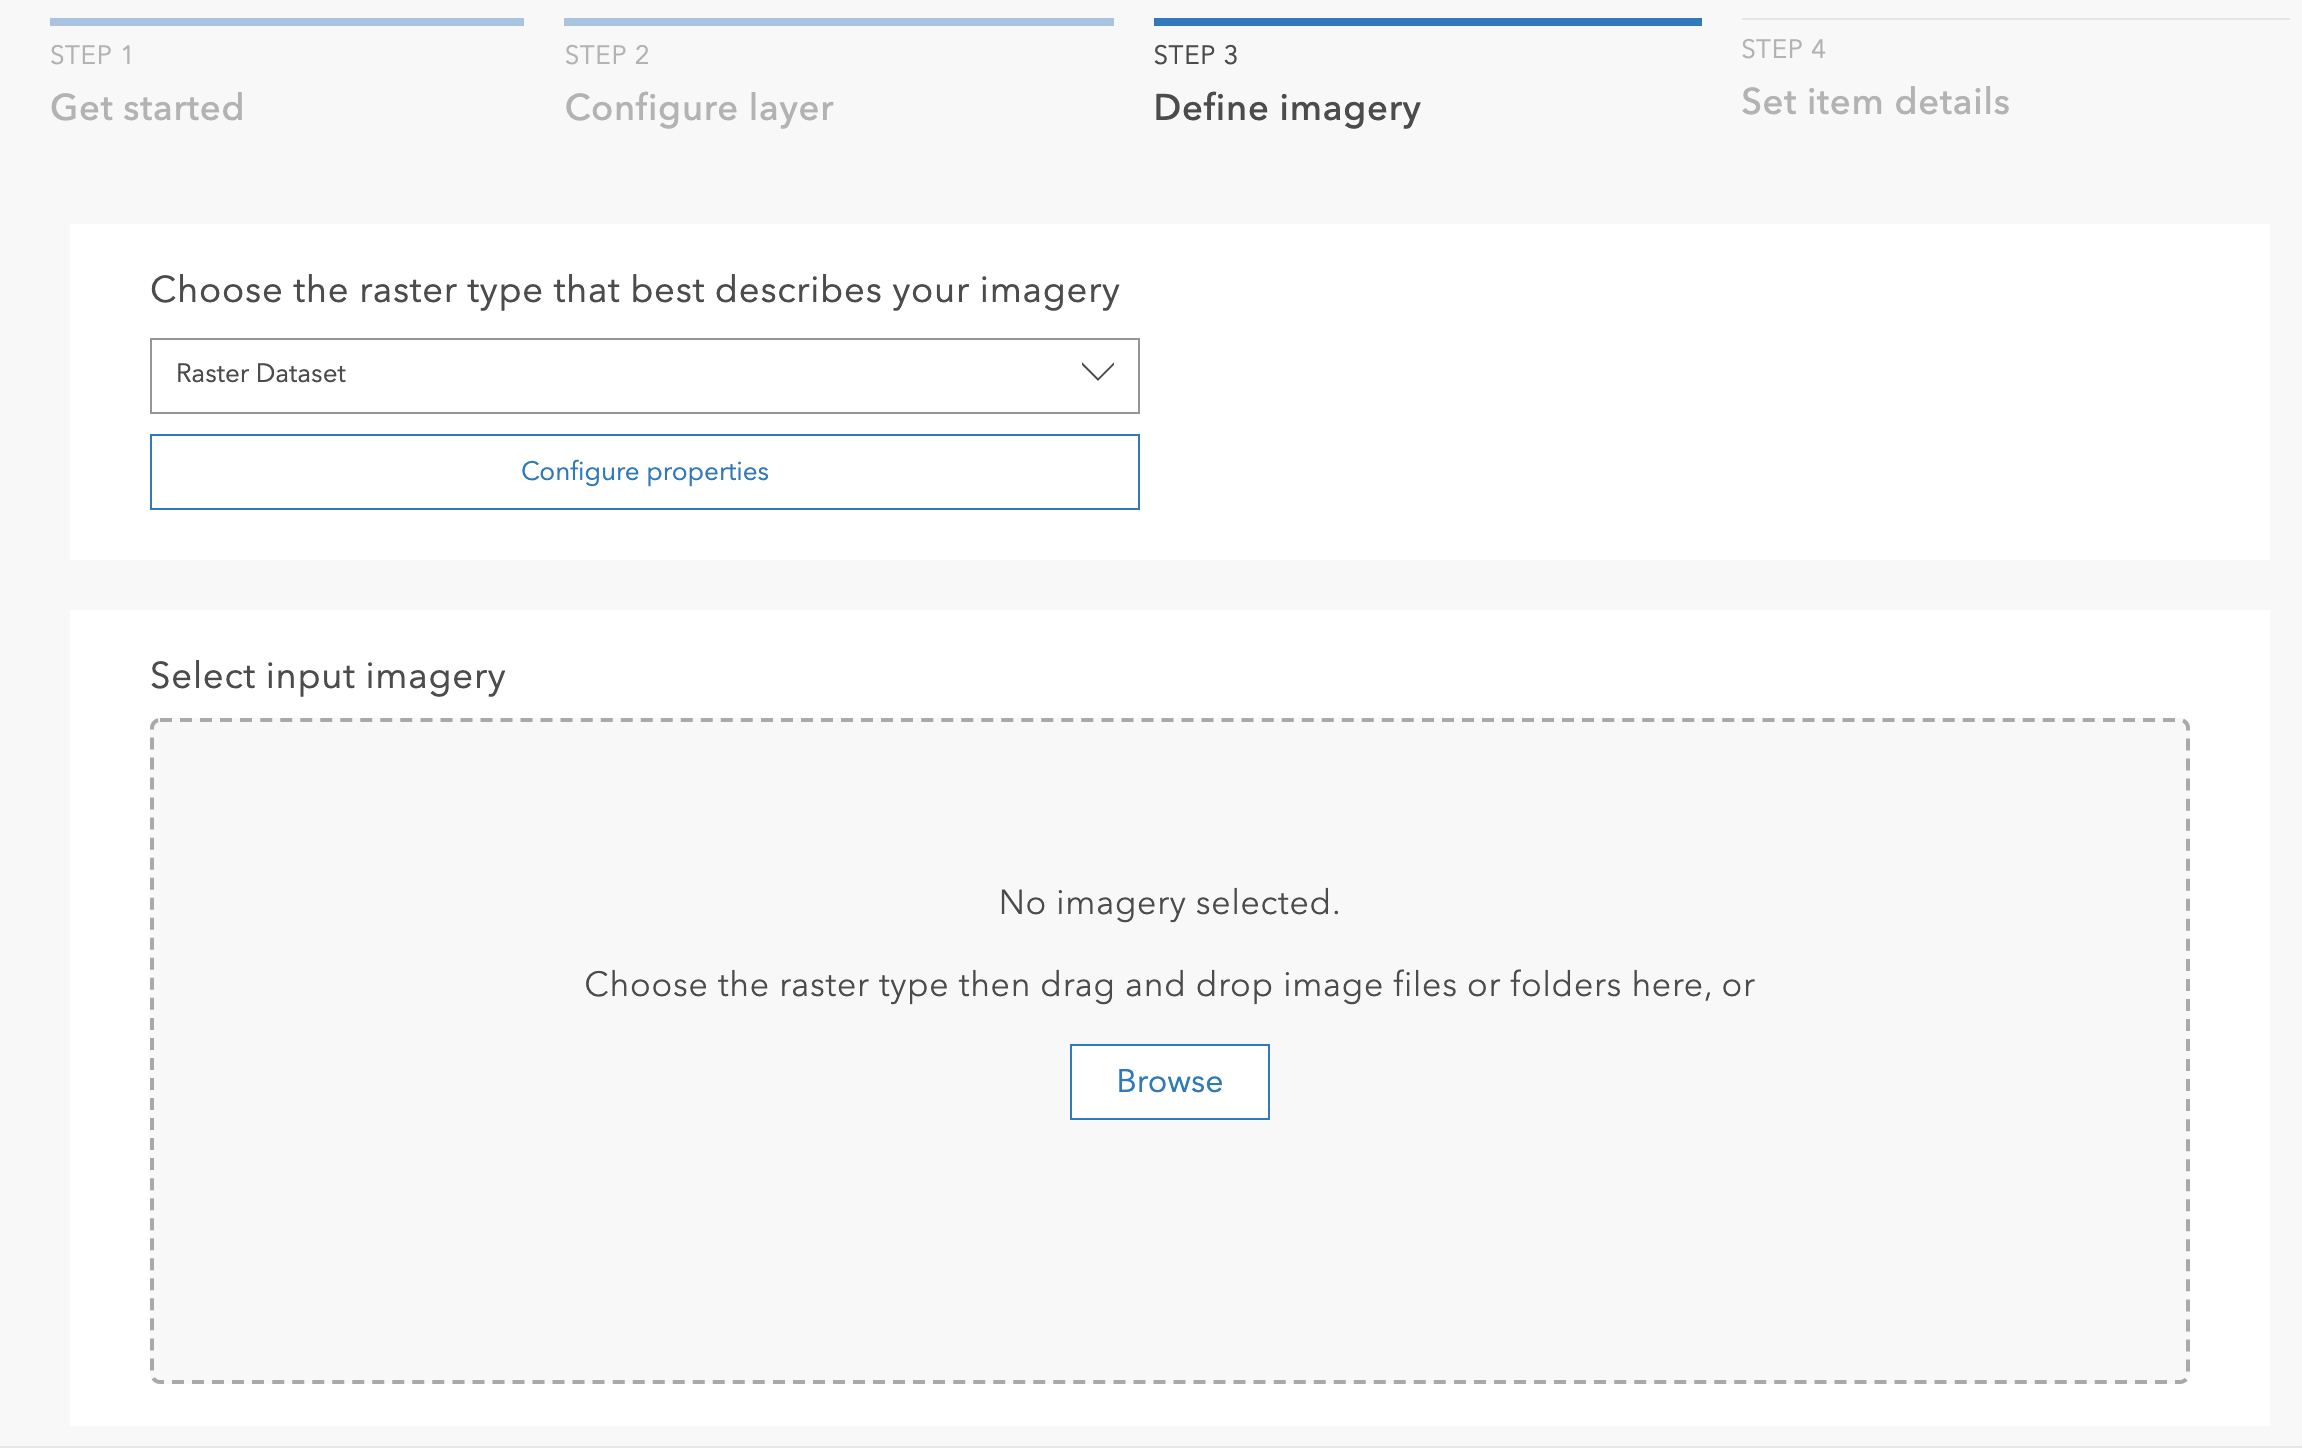 upload imagery files